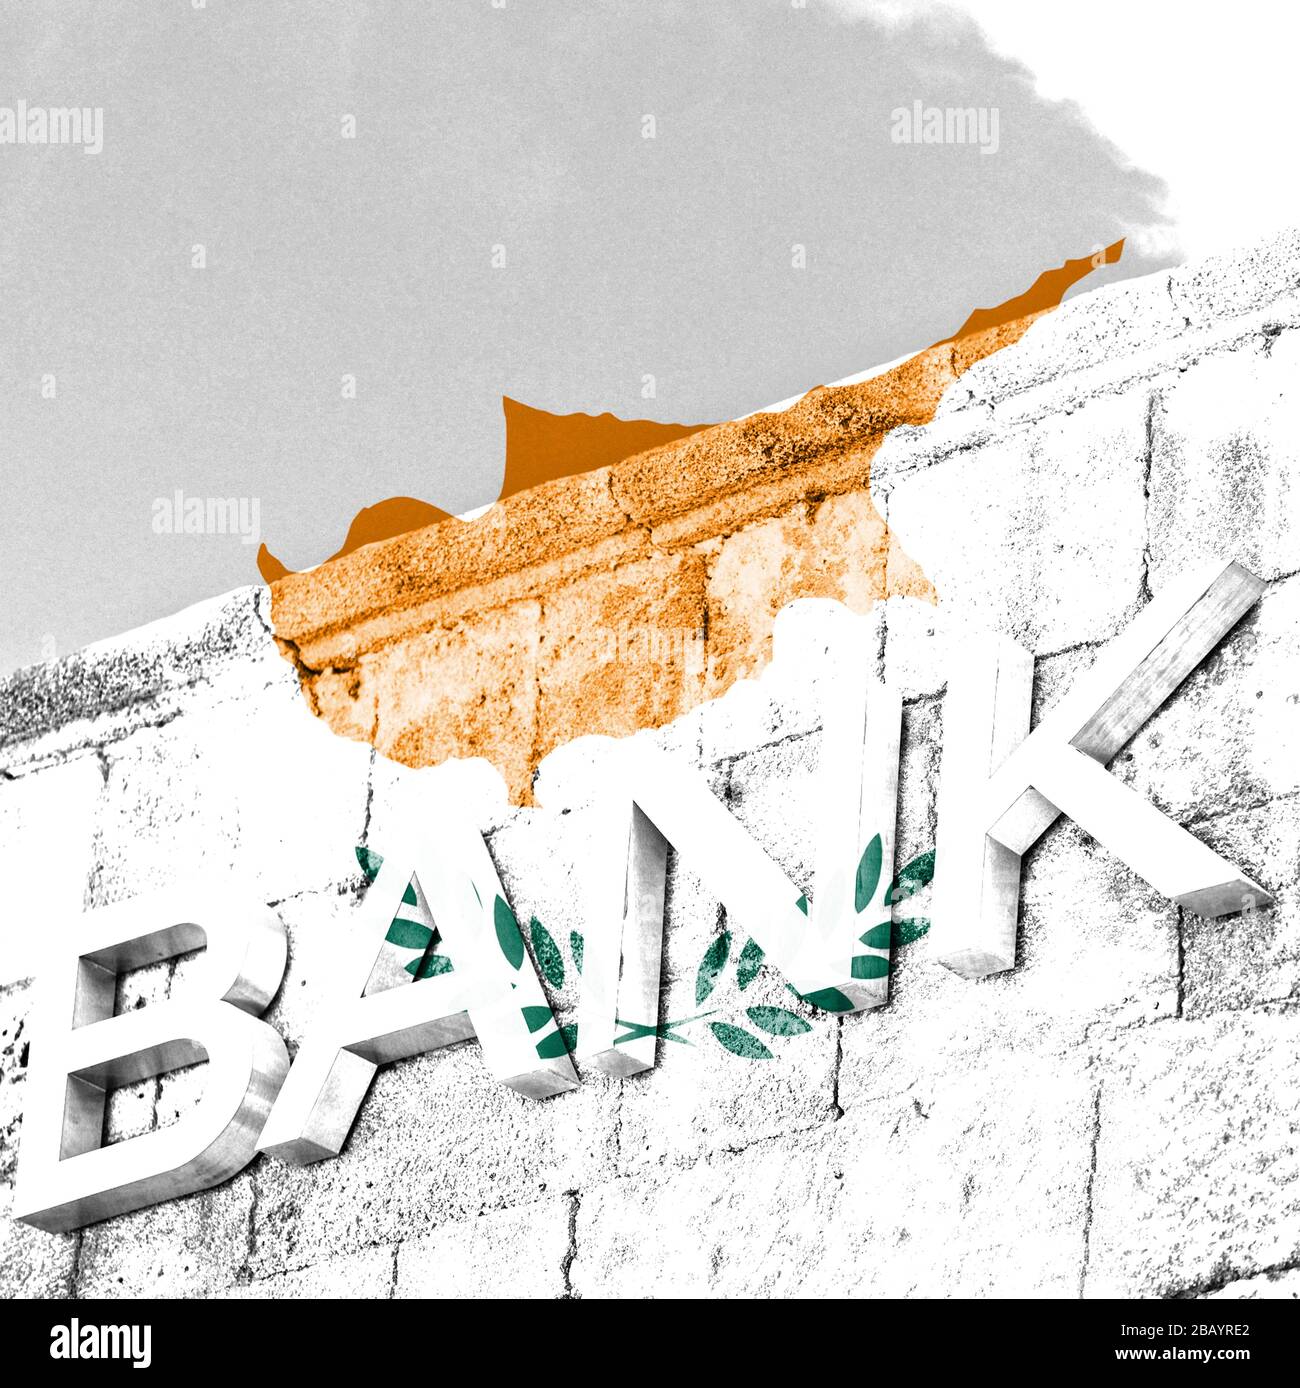 Finance and economy concept of bank with flag of Cyprus Stock Photo